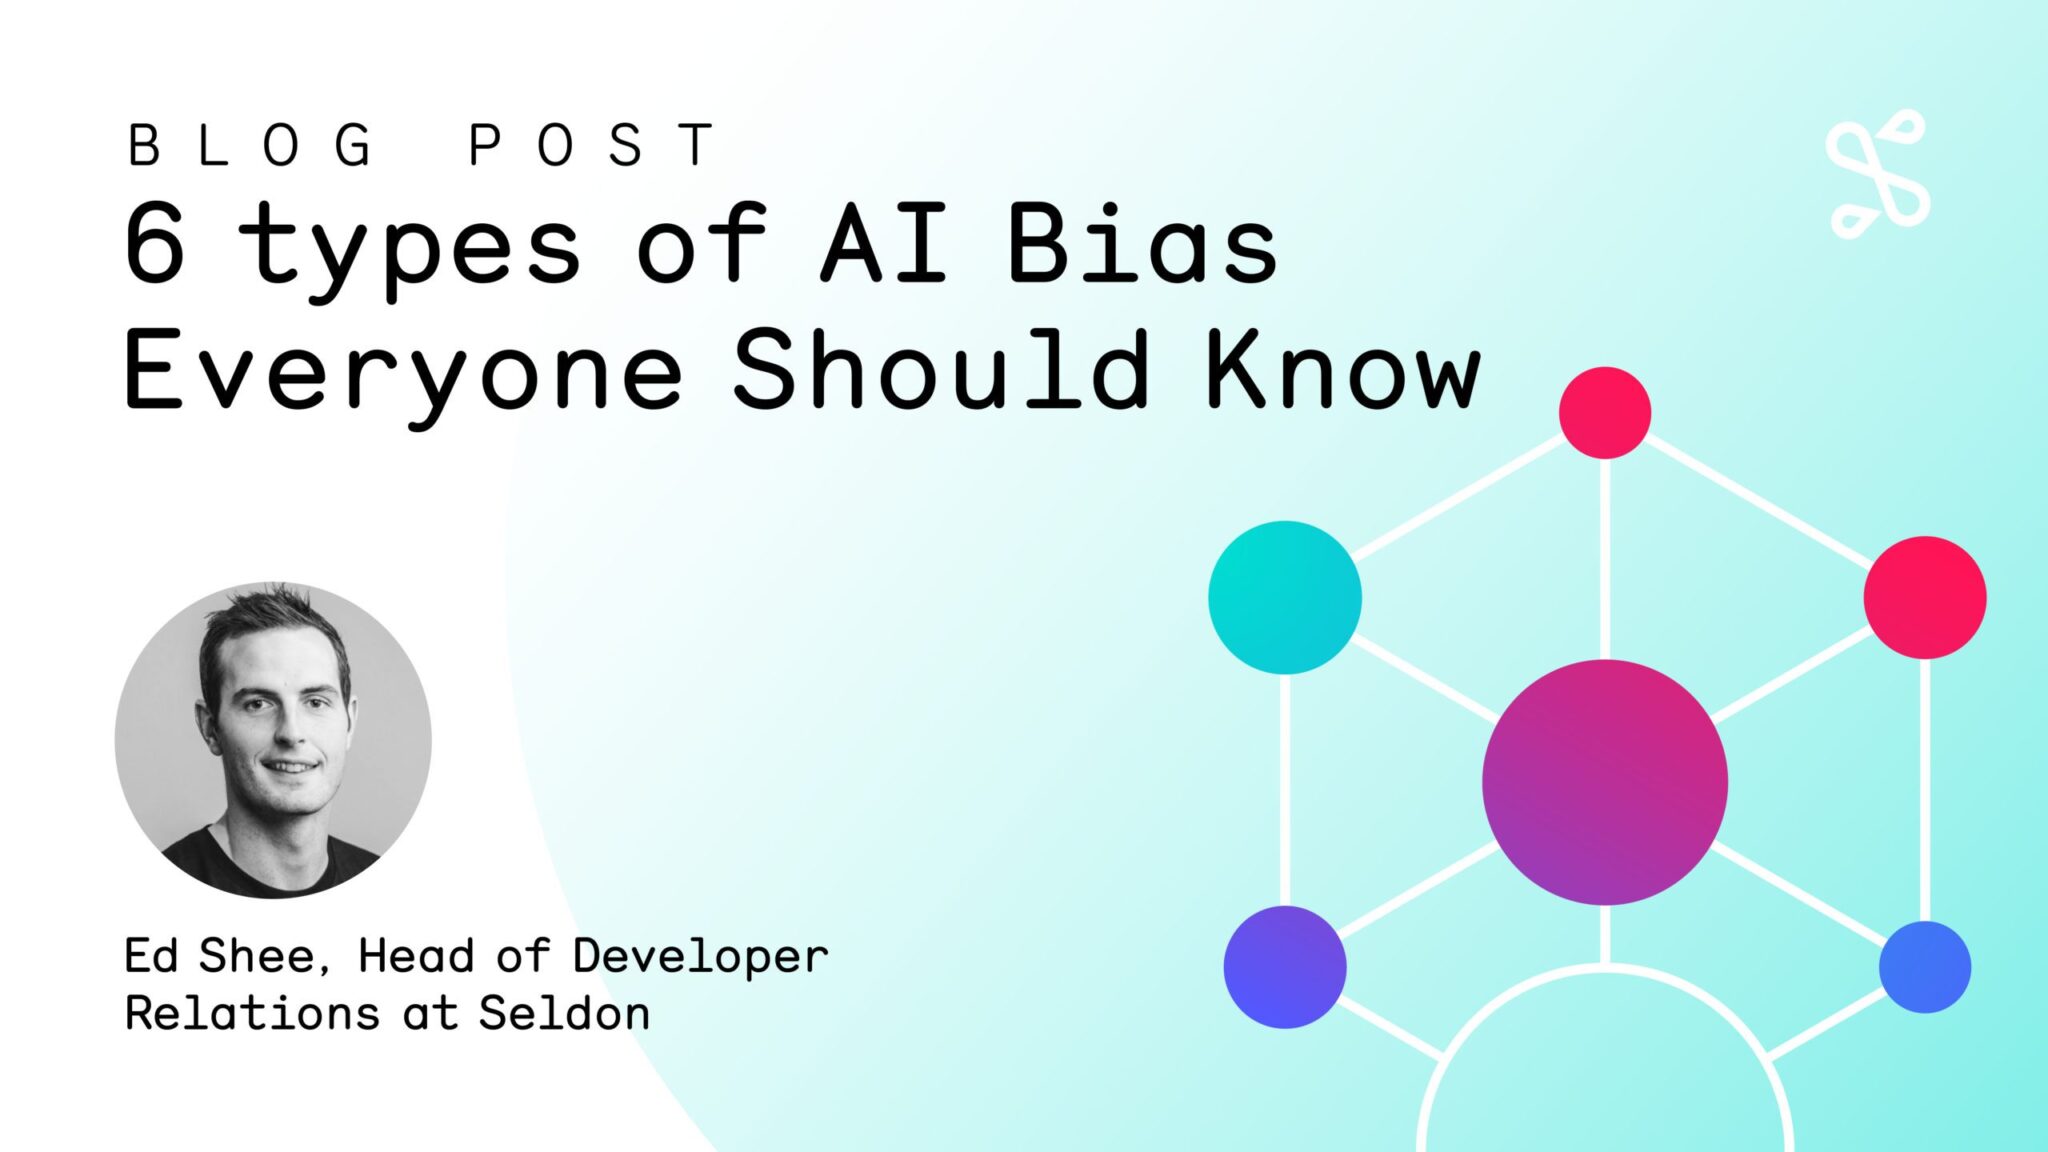 6 Types of AI Bias Everyone Should Know